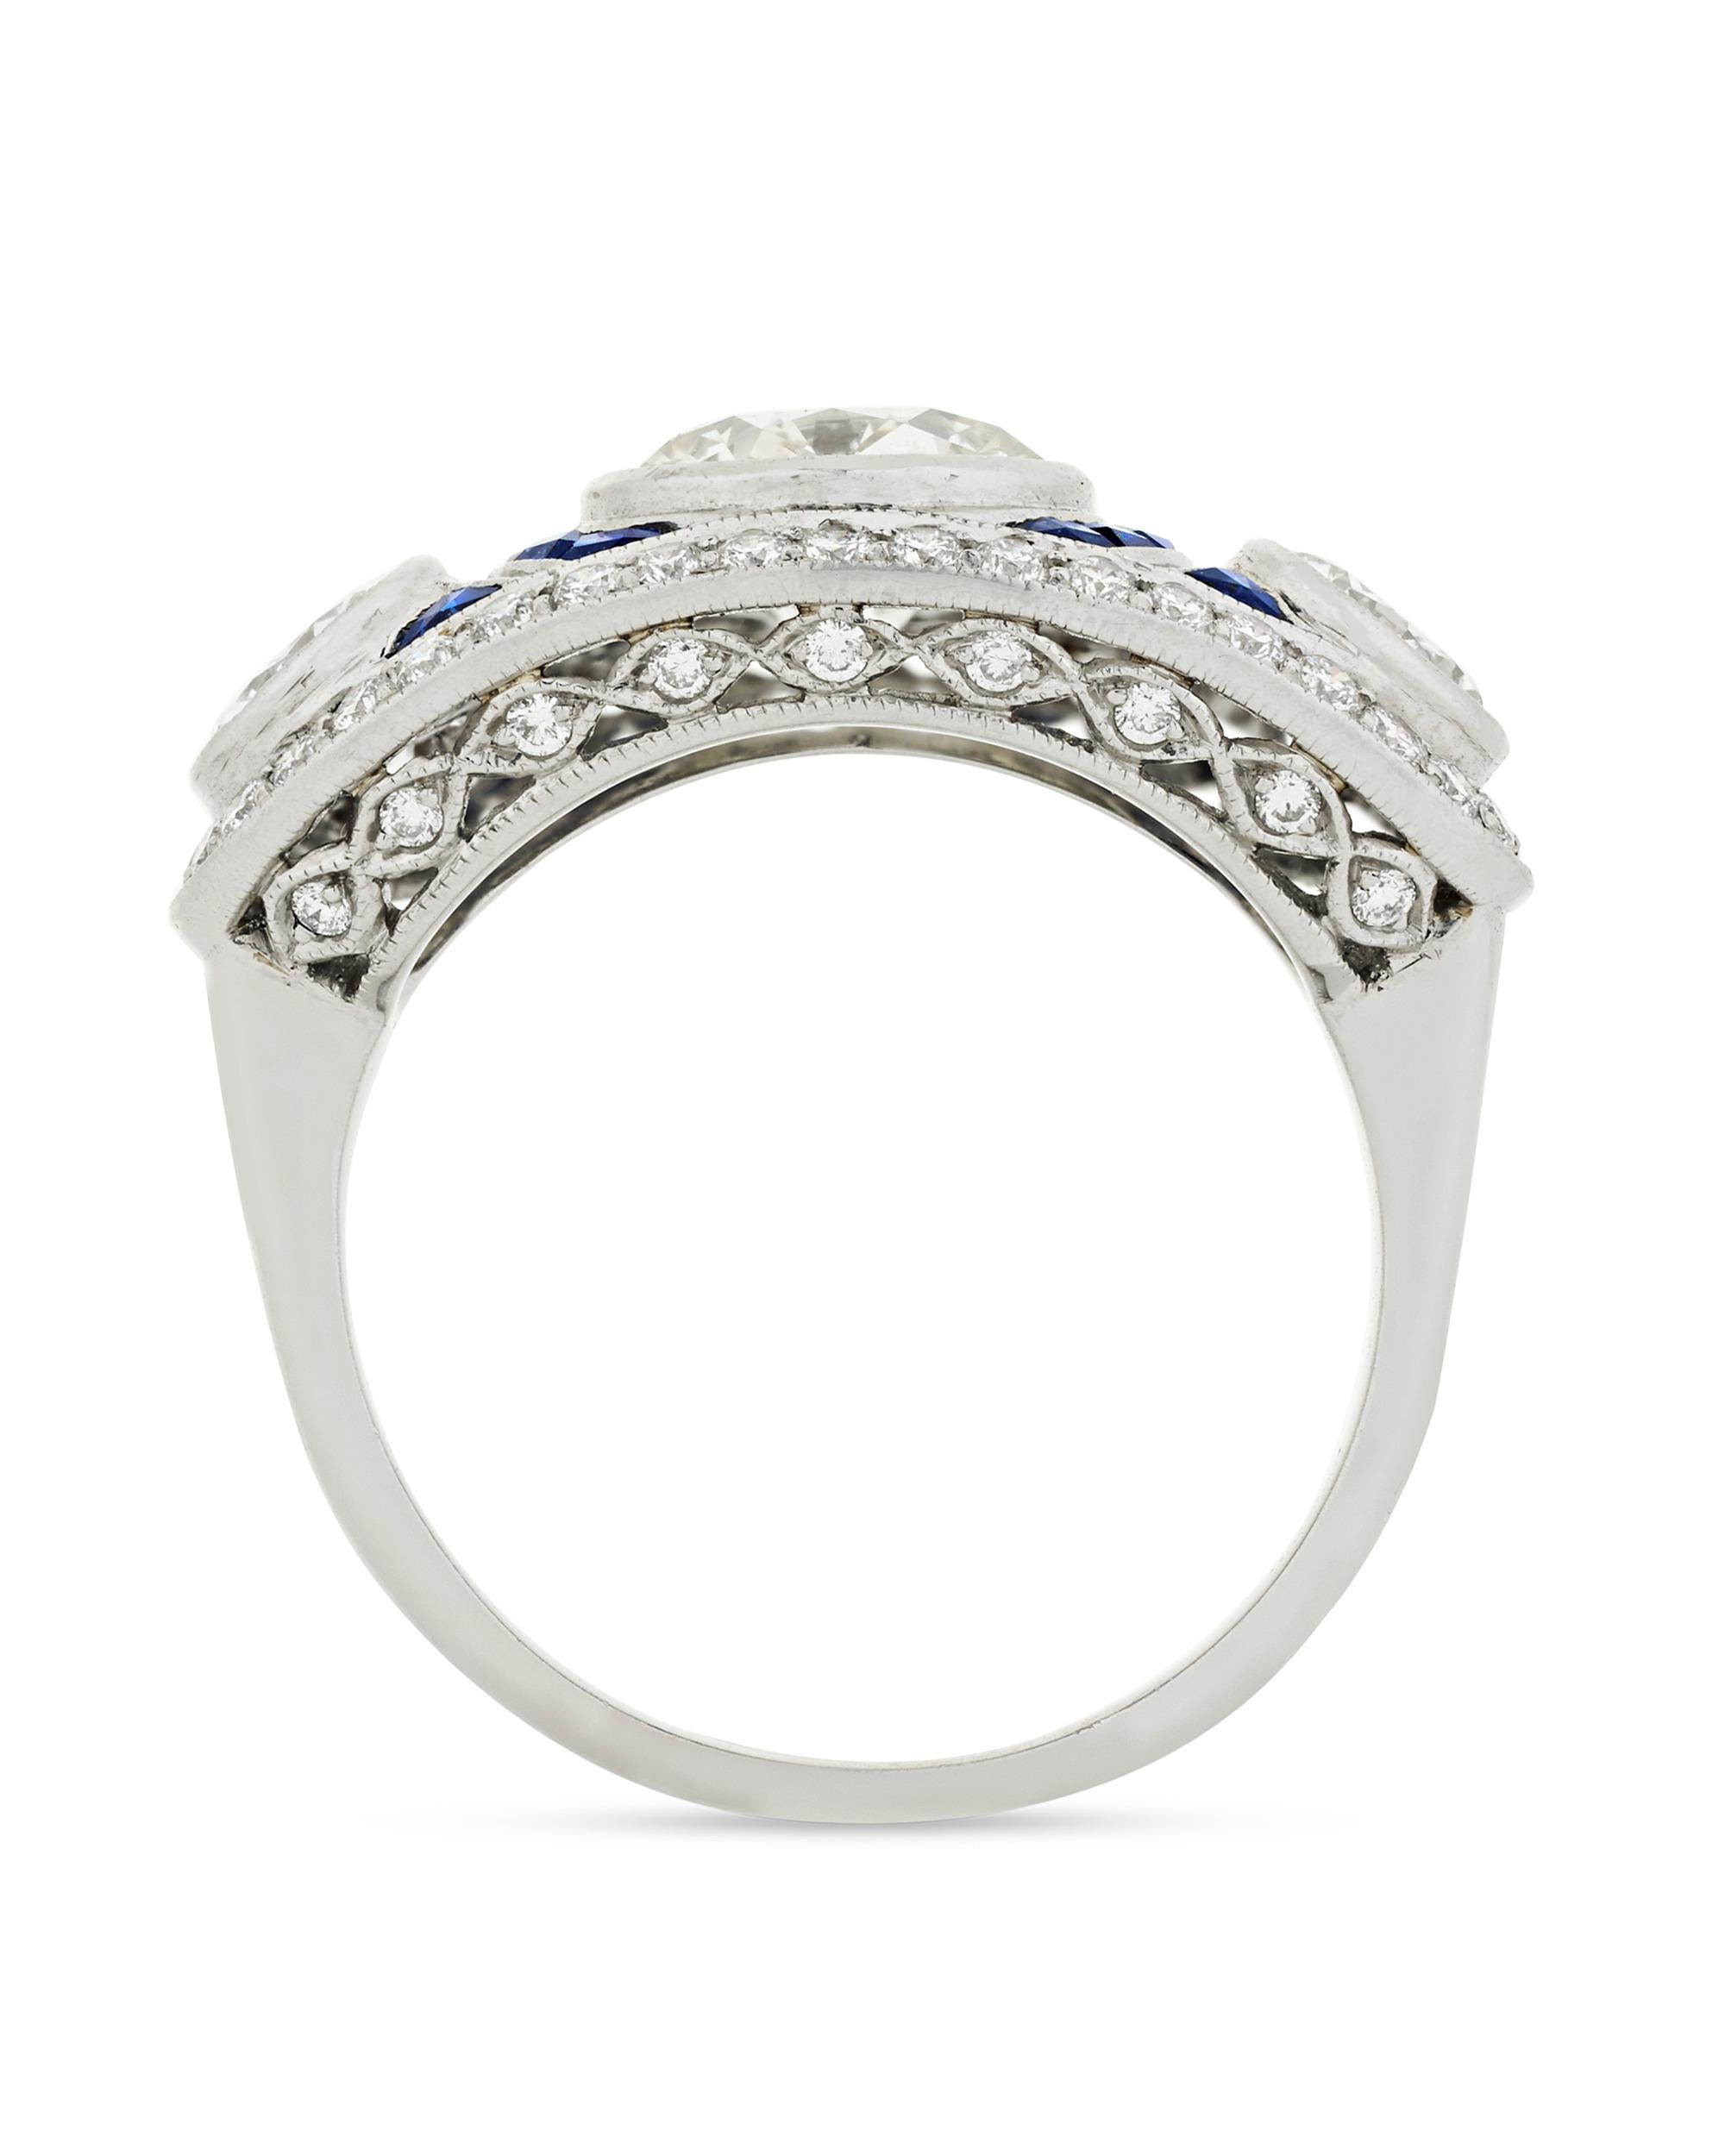 Three amazing diamonds are the stars of this ring inspired by the glamor of the Art Deco period. The jewels weigh a combined 2.40 carats and are separated by velvety blue sapphires. .50 carat of diamond accents add even more sparkle to this glorious